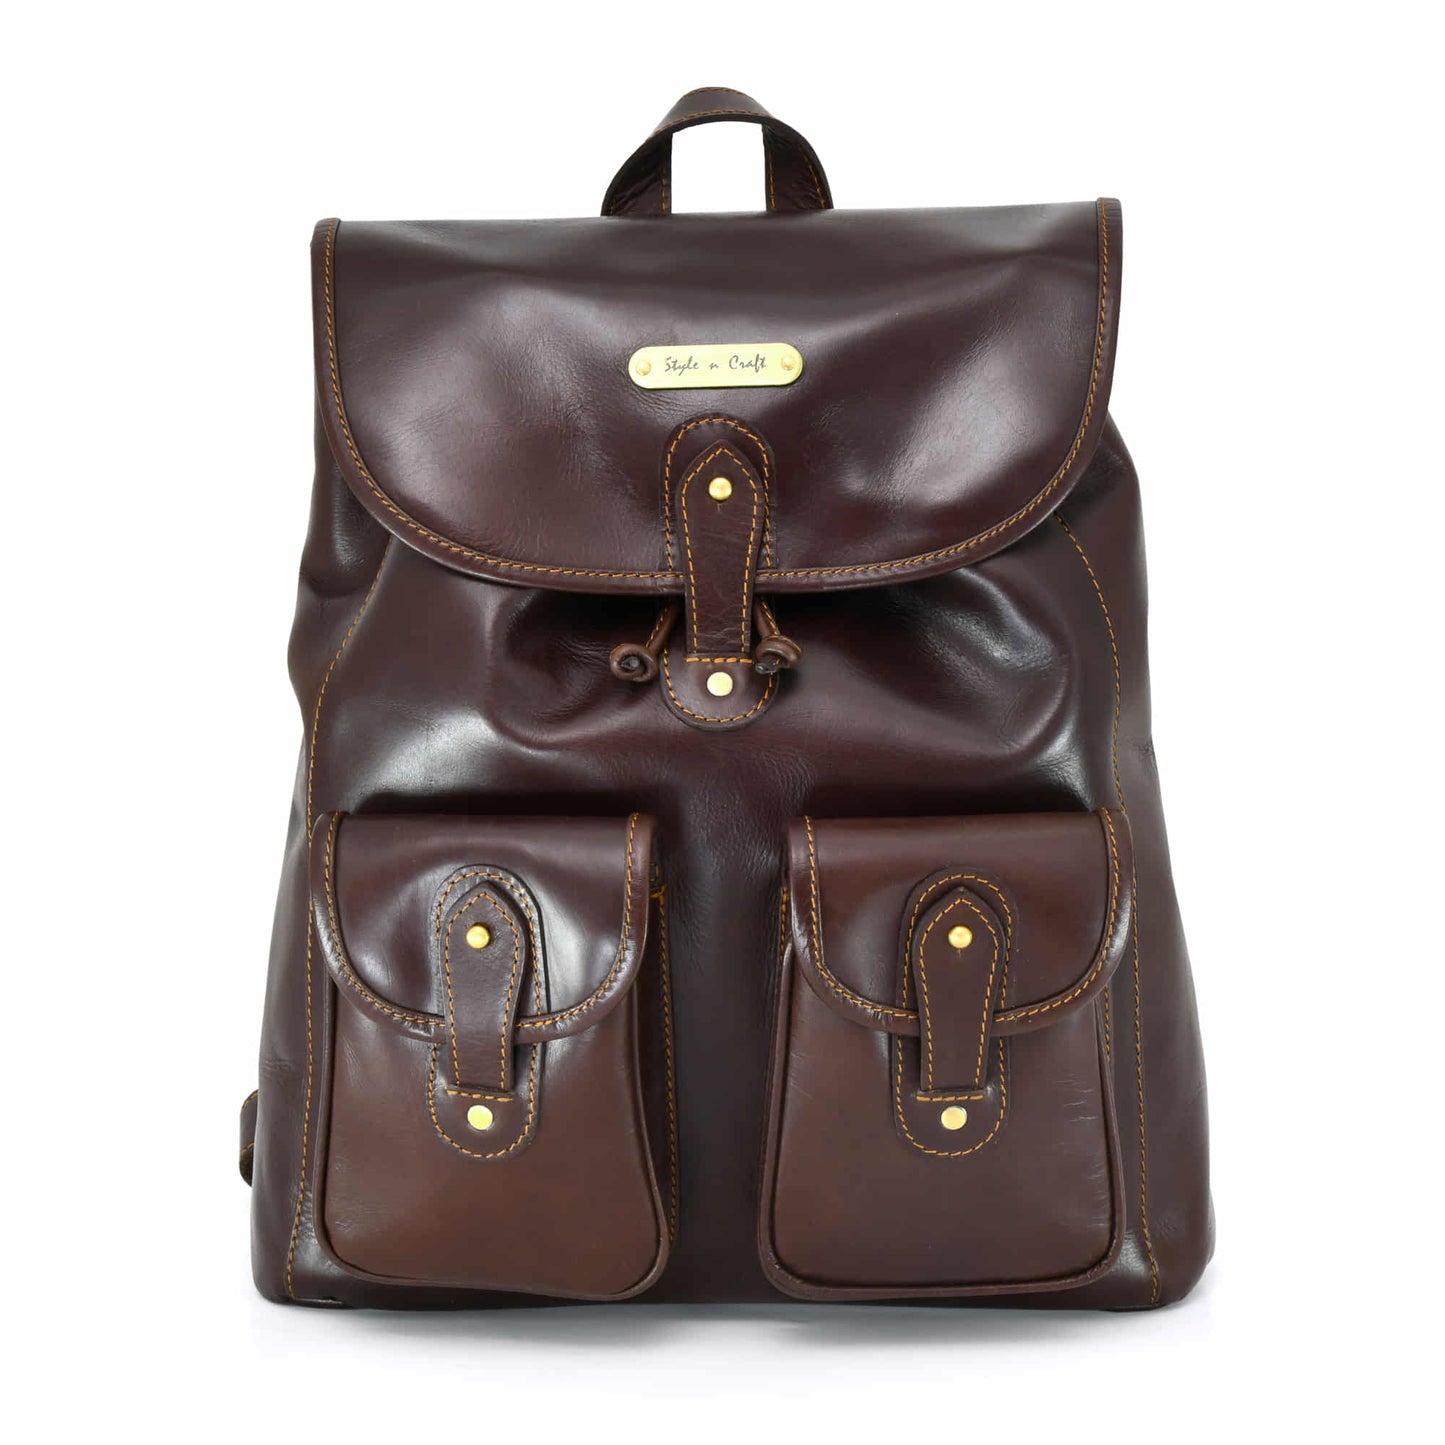 Style n Craft 392151 Backpack in Full Grain Dark Brown Leather, Medium Size - Front View Showing Top Flap Closure, 2 Front Pockets & Leather Hand Carry Strap